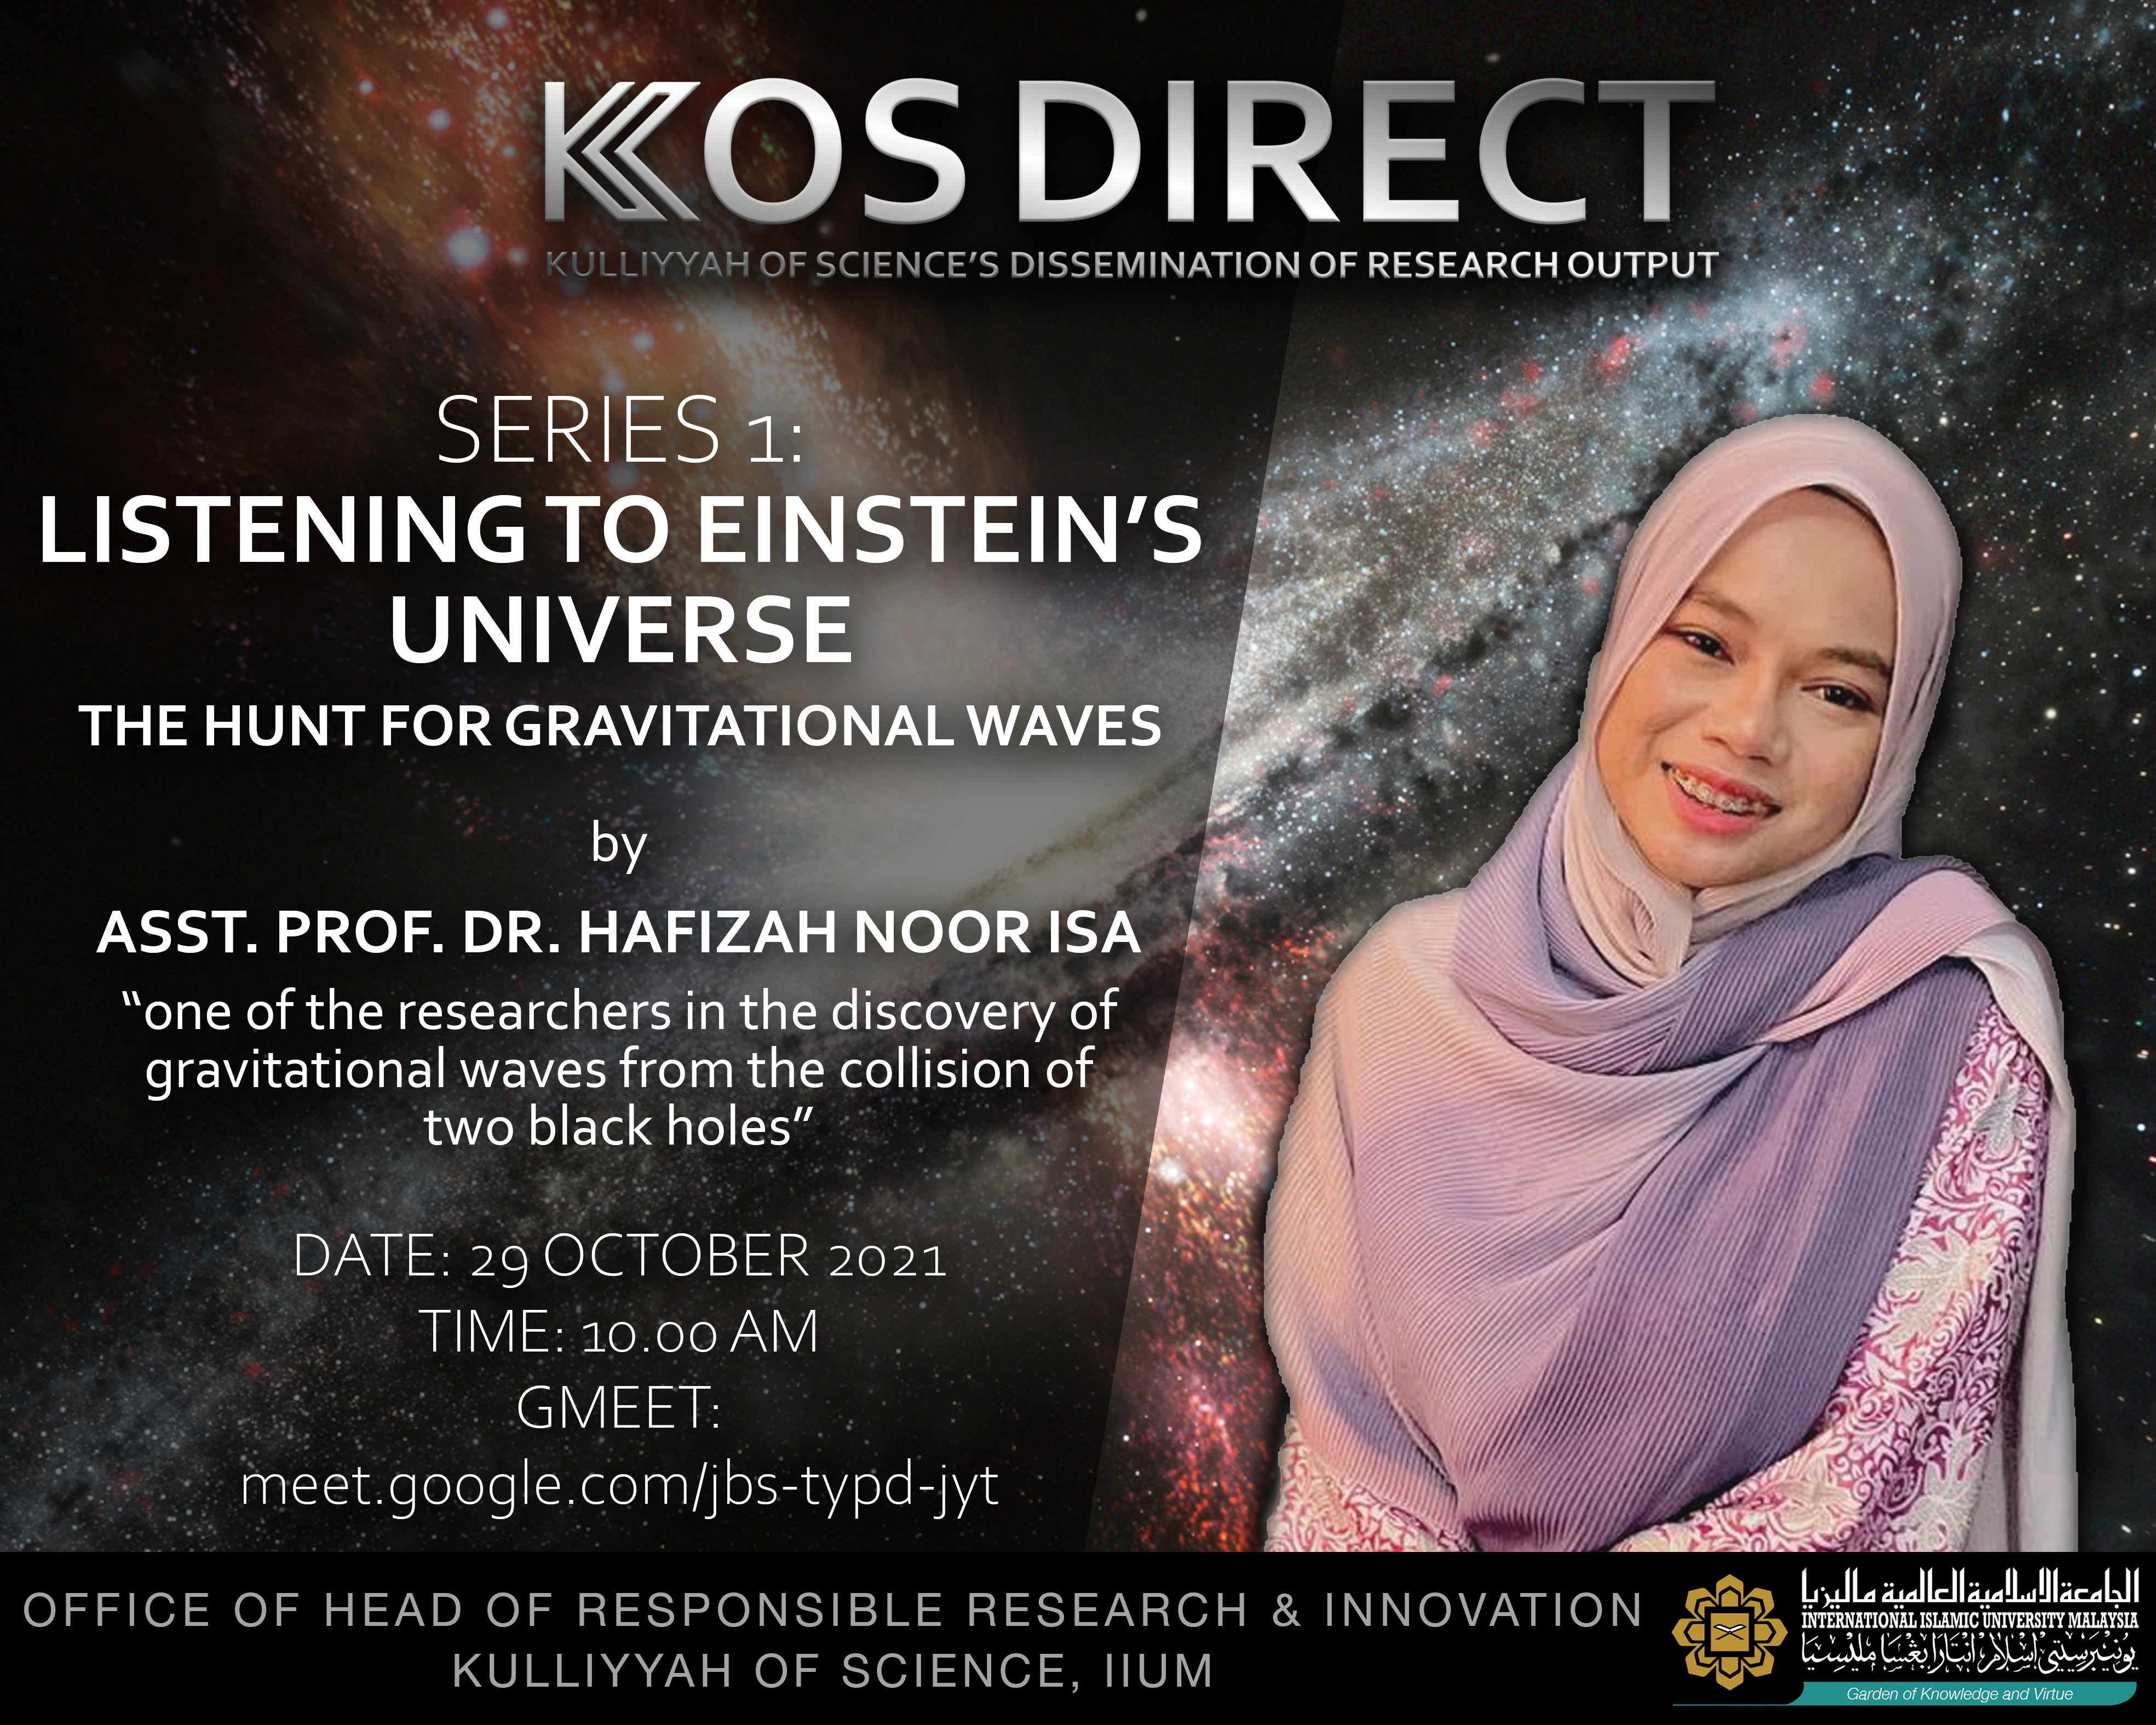 Kulliyyah of Science Dissemination of Research Output (KOS DIRECT) Series 1